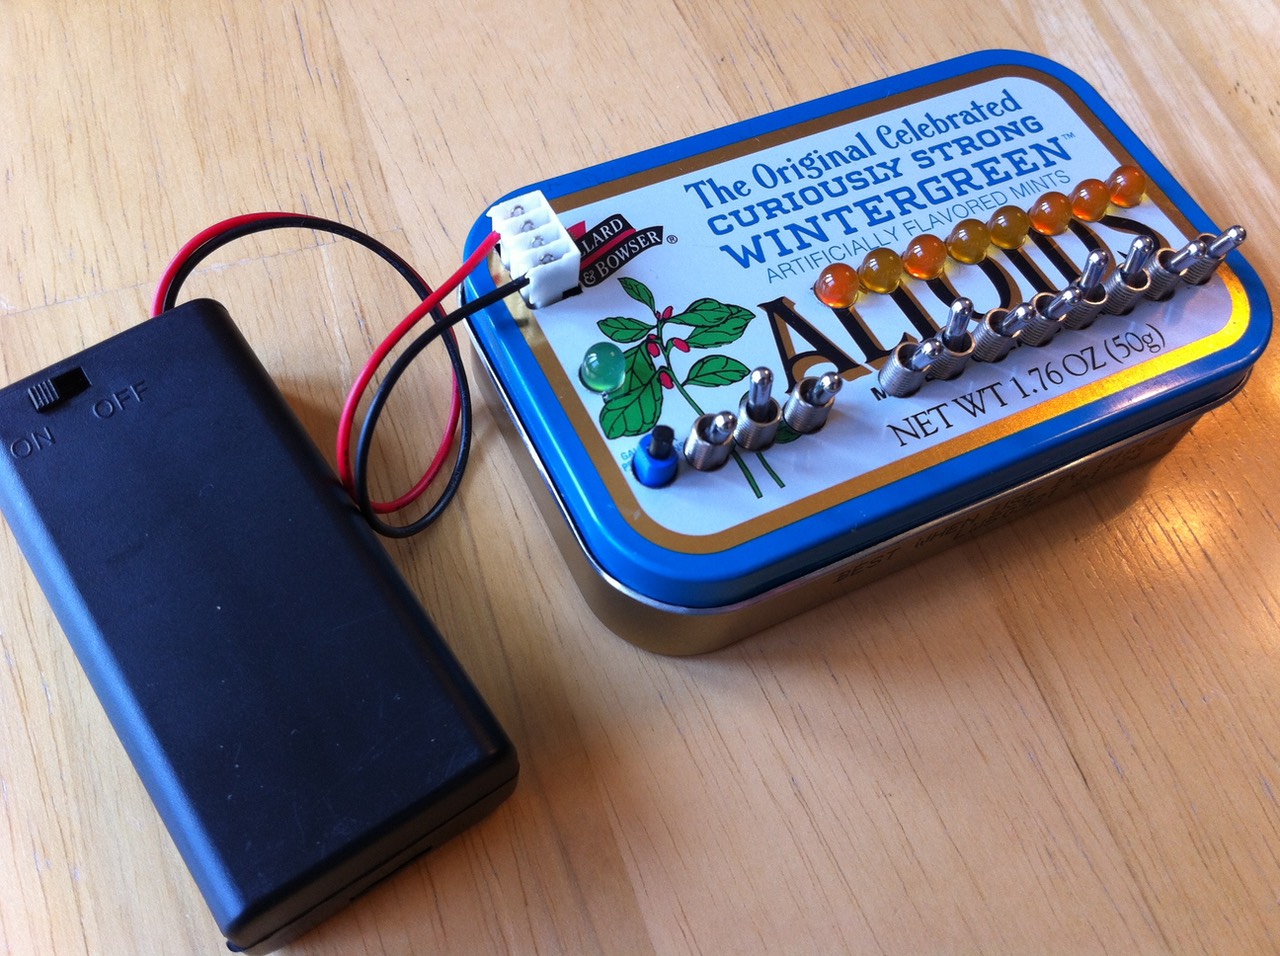 Altoids Tin Electronics Lab (everything out), This is a sma…